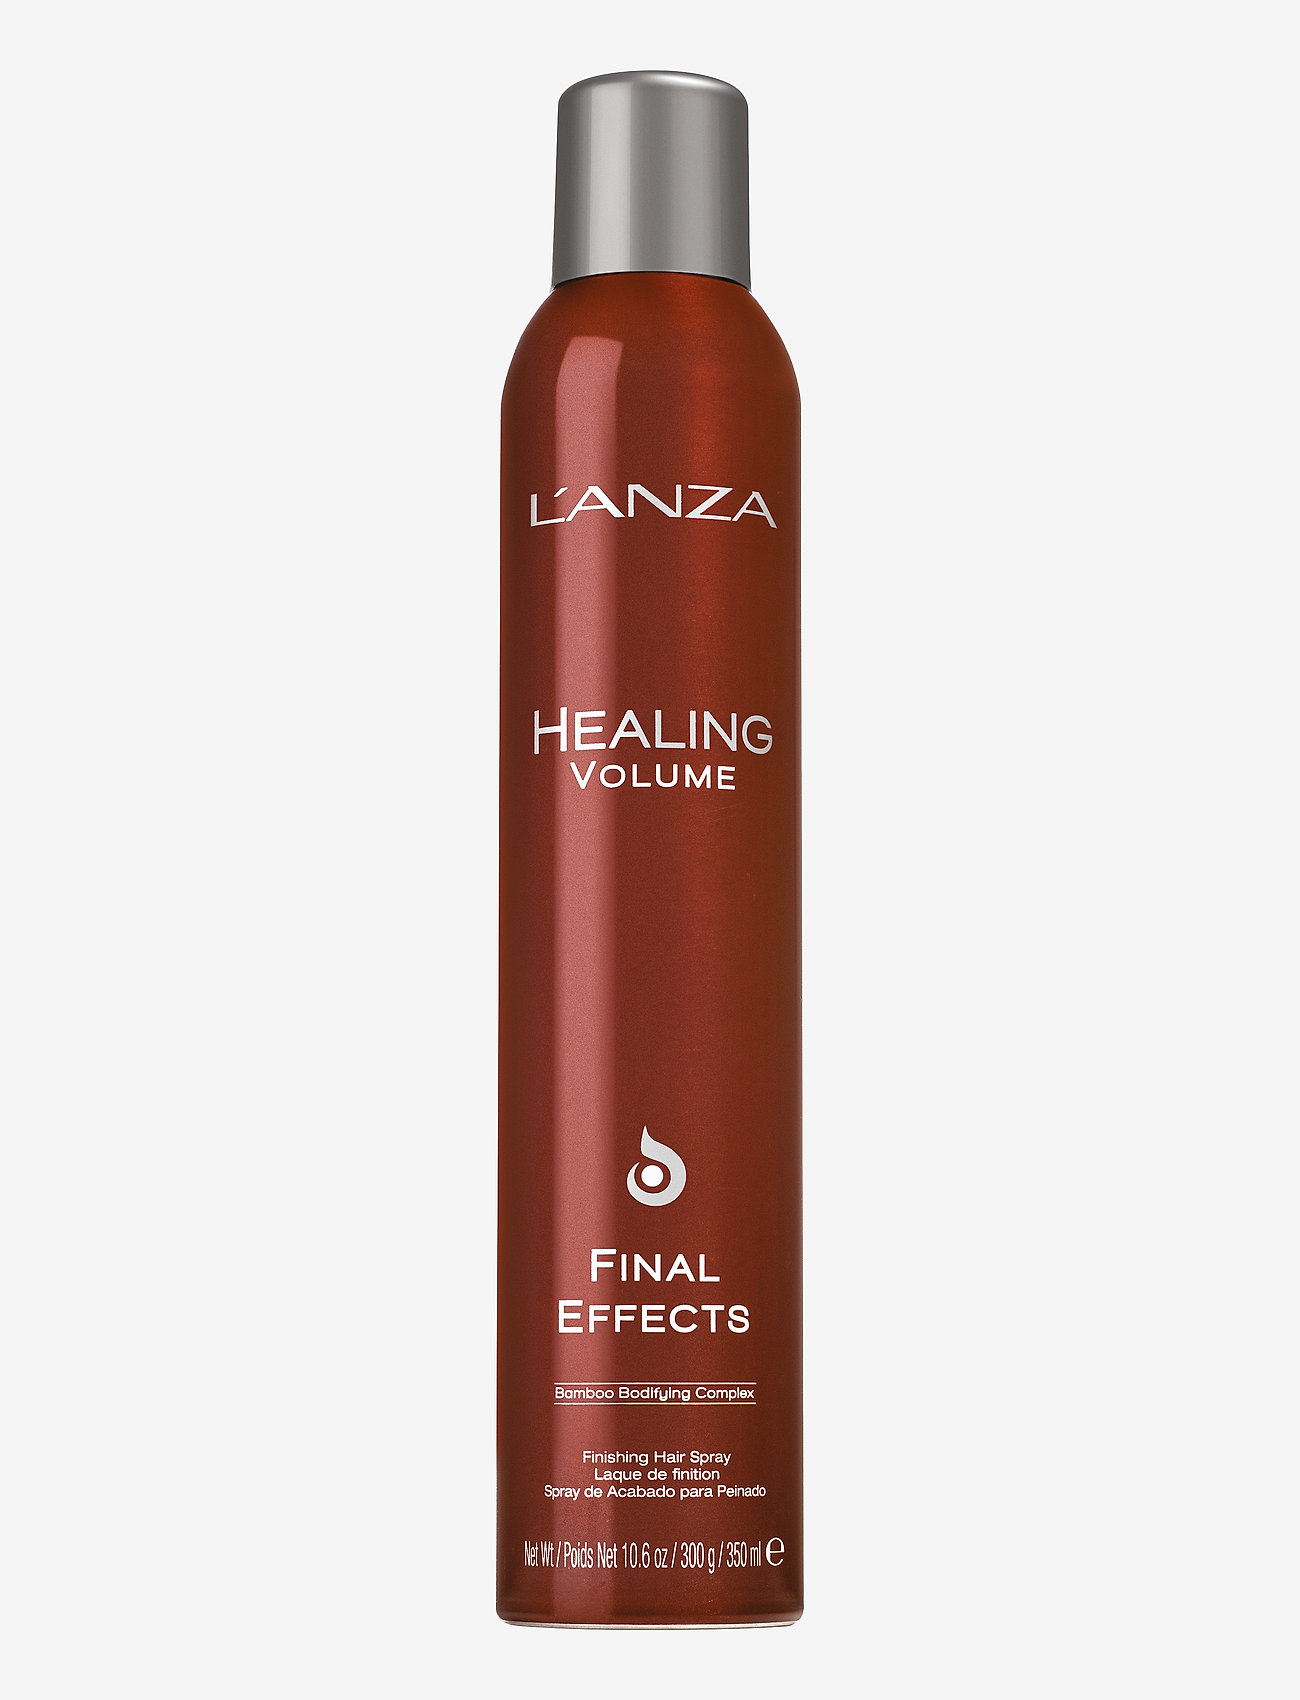 L'ANZA Healing Hair Color & Care - Final Effects - no color - 0